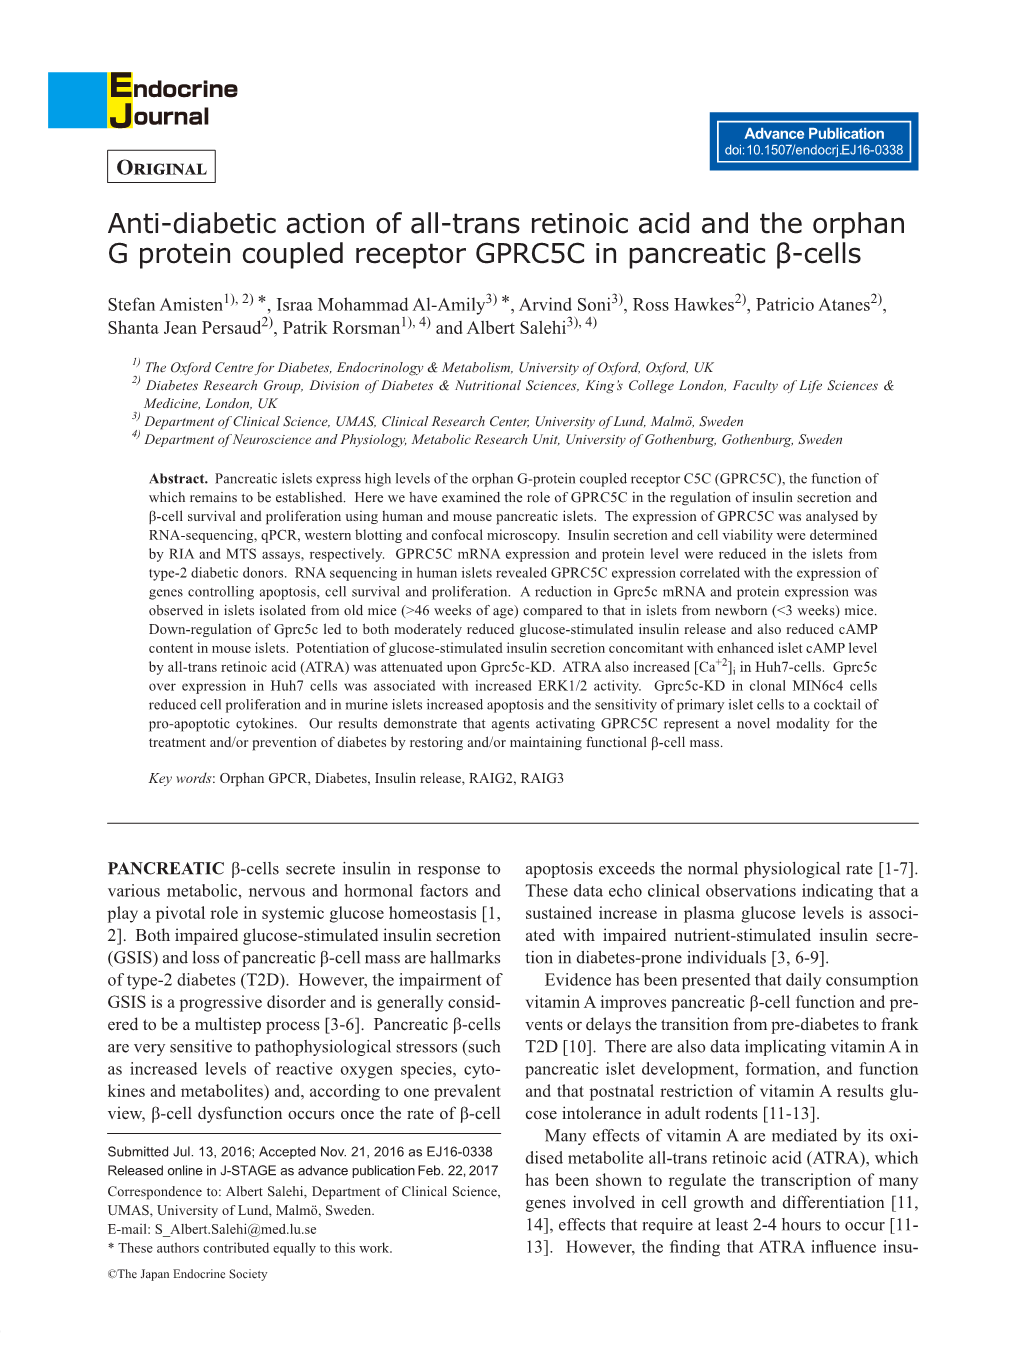 Anti-Diabetic Action of All-Trans Retinoic Acid and the Orphan G Protein Coupled Receptor GPRC5C in Pancreatic Β-Cells